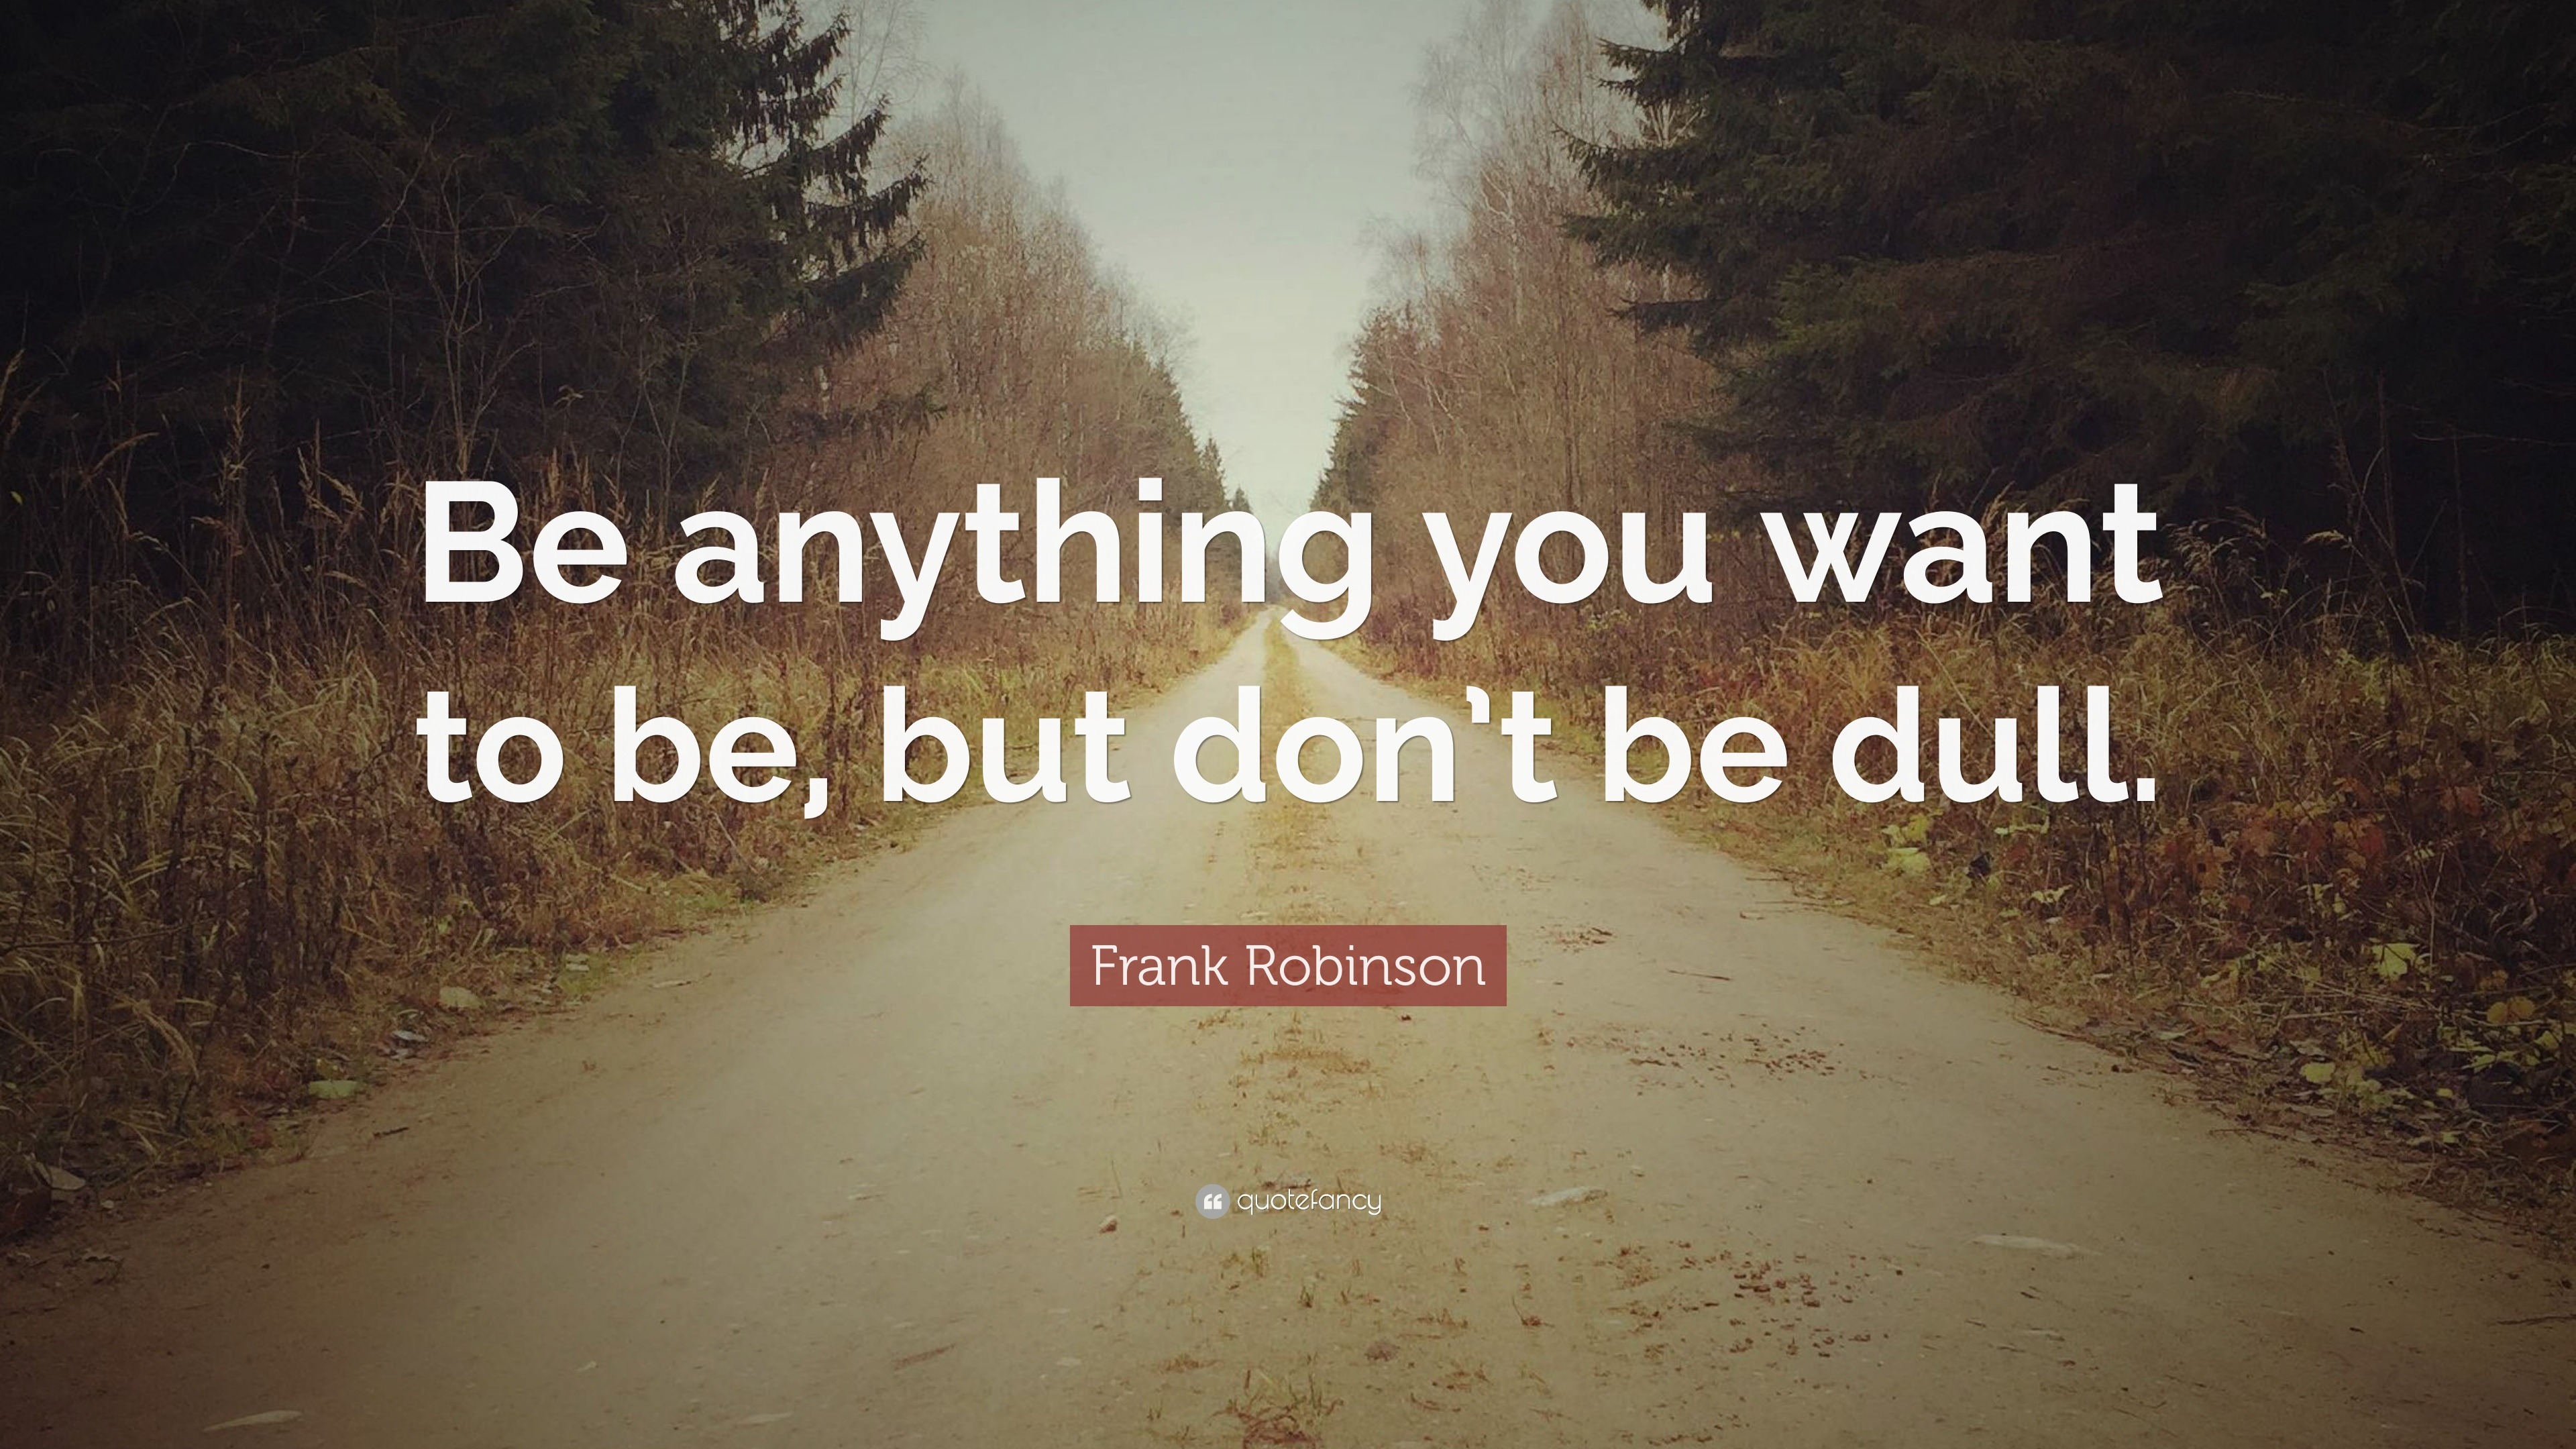 Frank Robinson Quote: “Be anything you want to be, but don't be dull.”